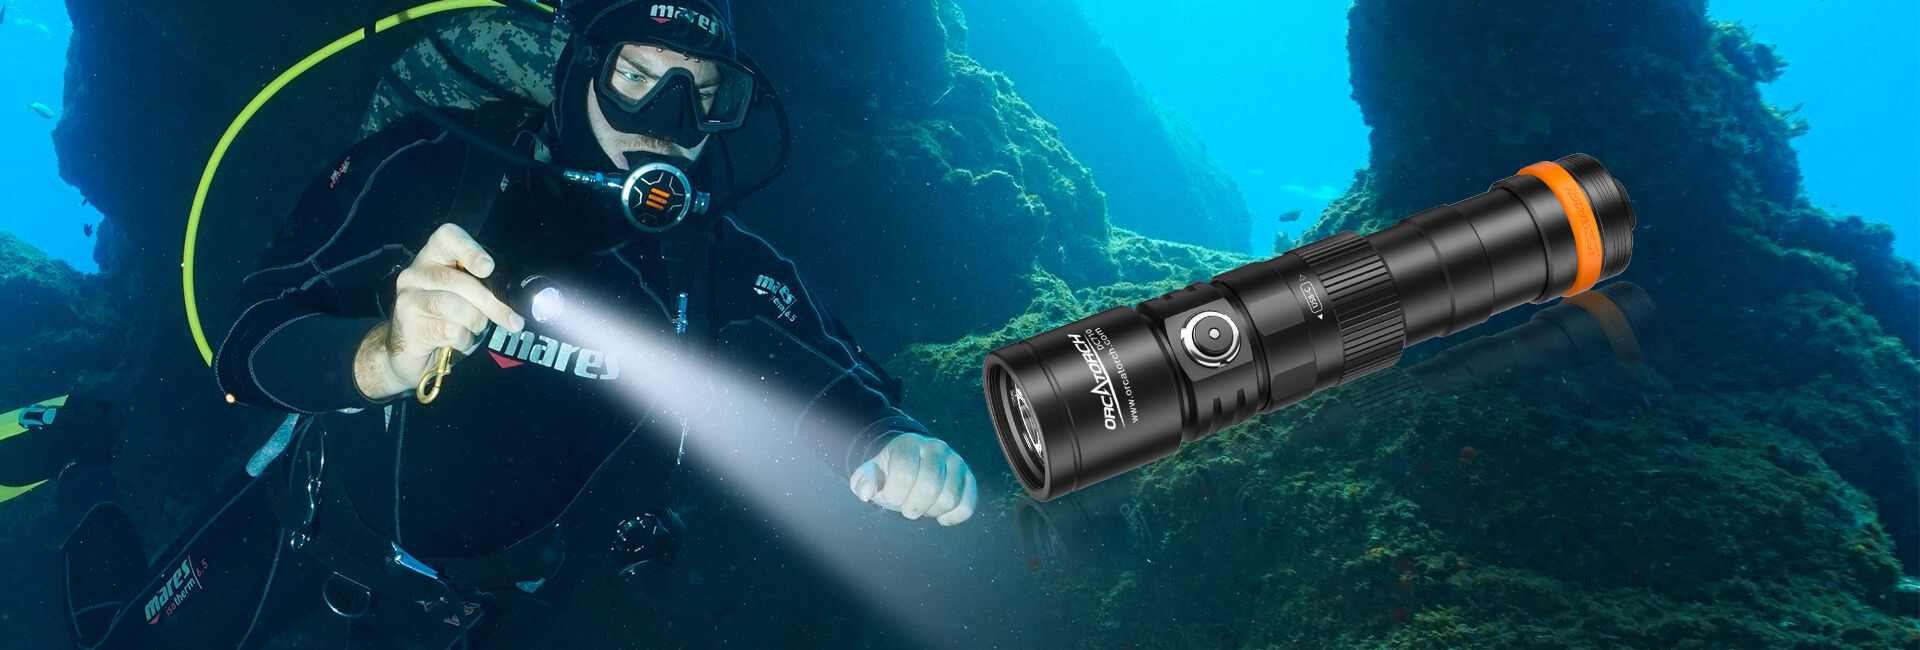 DC710 Direct Charge Dive Light